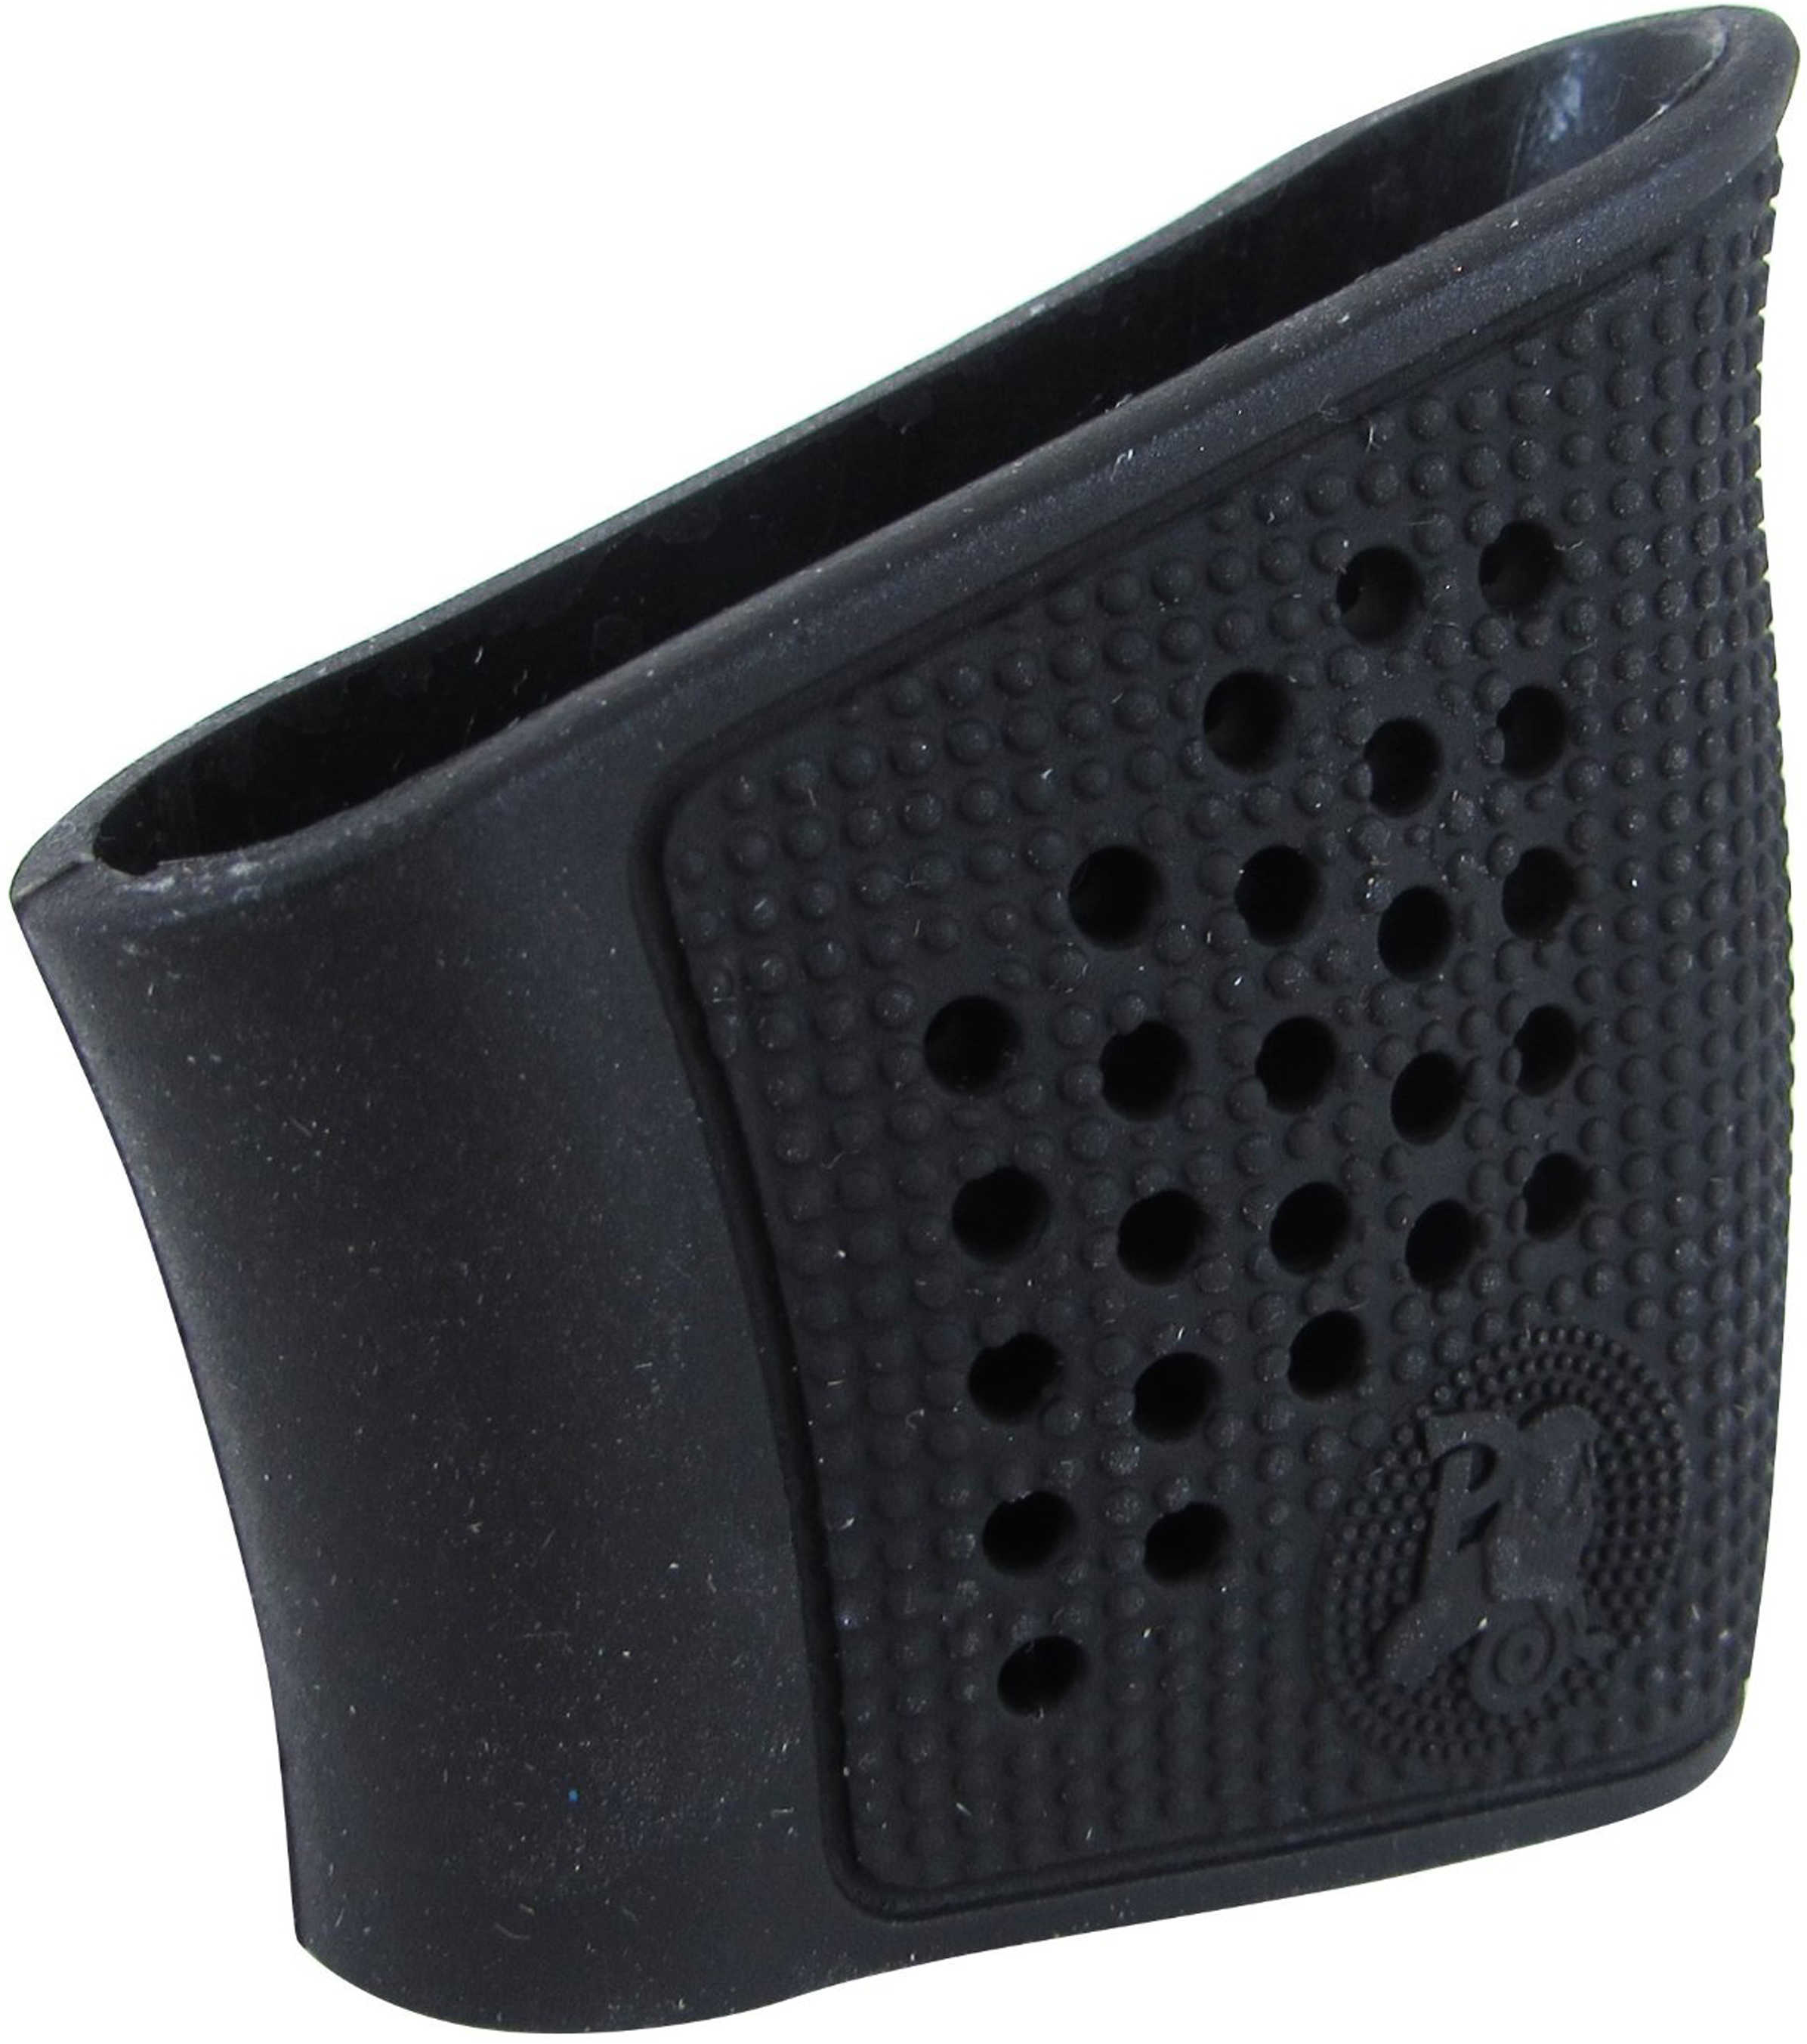 Pachmayr Tactical Grip Glove For Glock 42 & 43